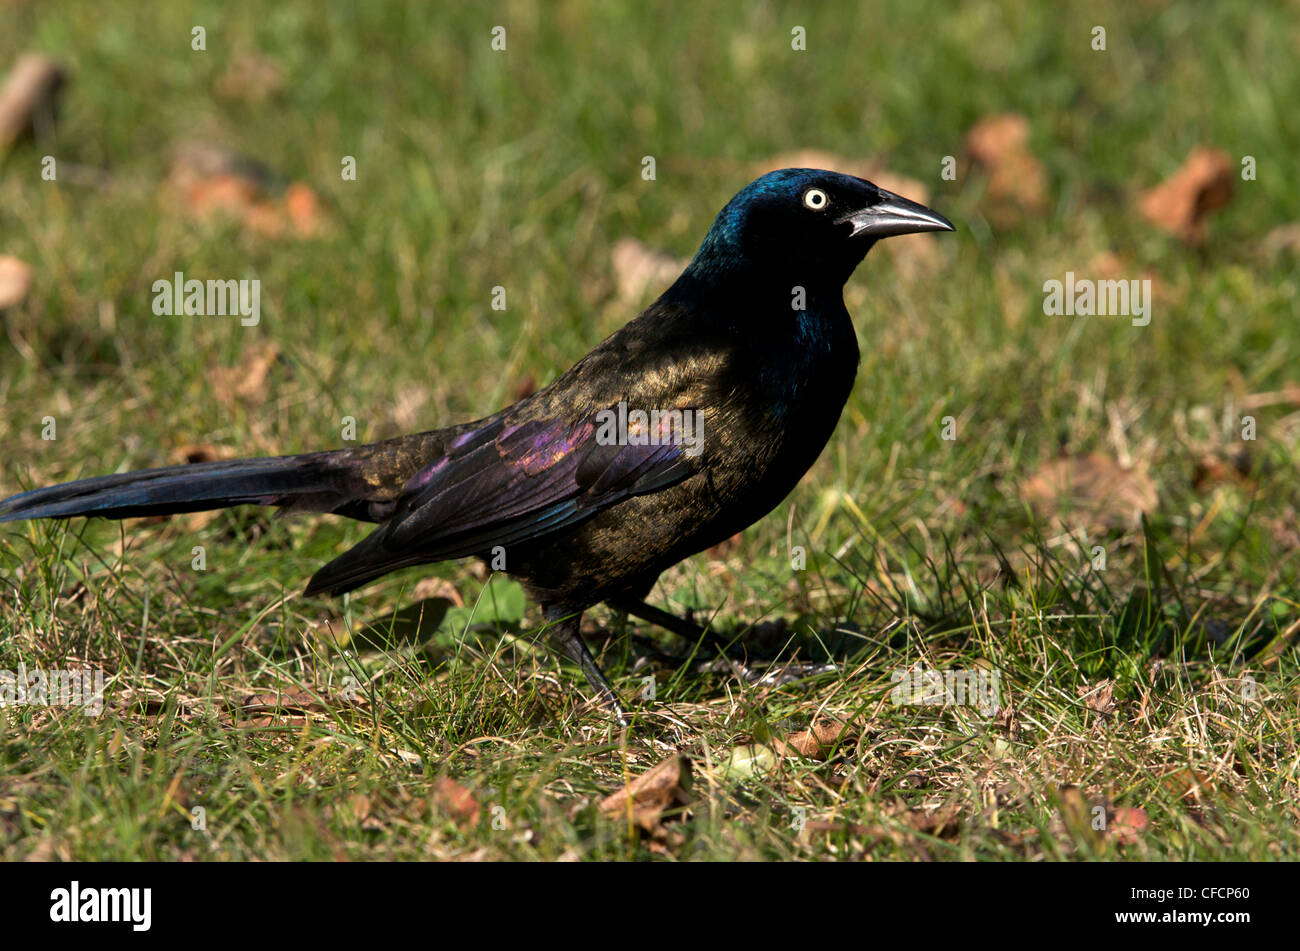 Common Grackle (Quiscalus quiscula) on grassy ground. Ontario, Canada. Stock Photo